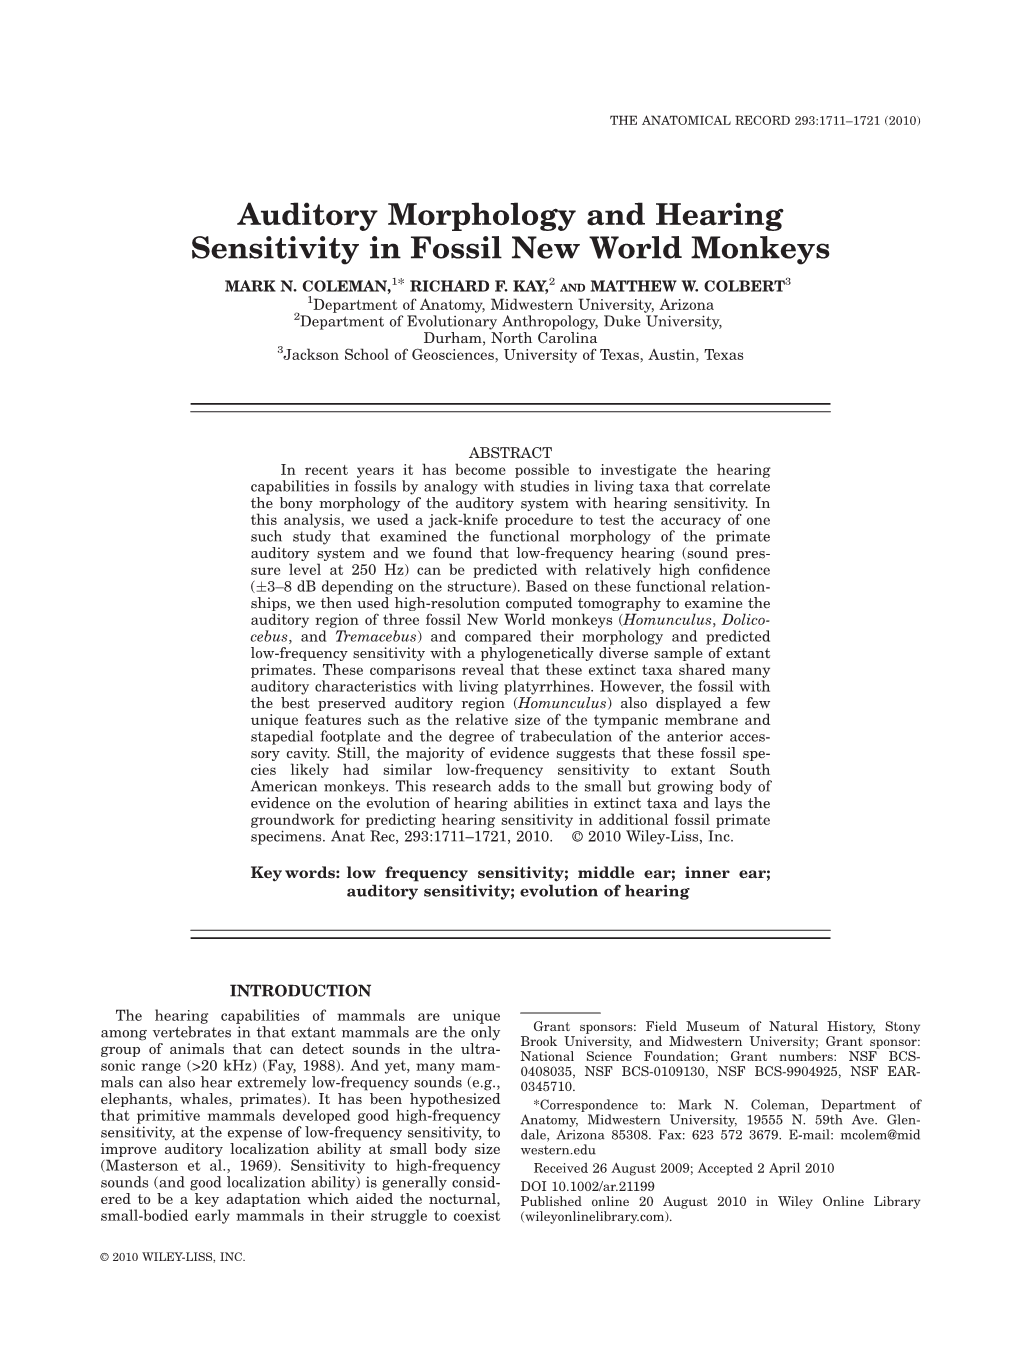 Auditory Morphology and Hearing Sensitivity in Fossil New World Monkeys